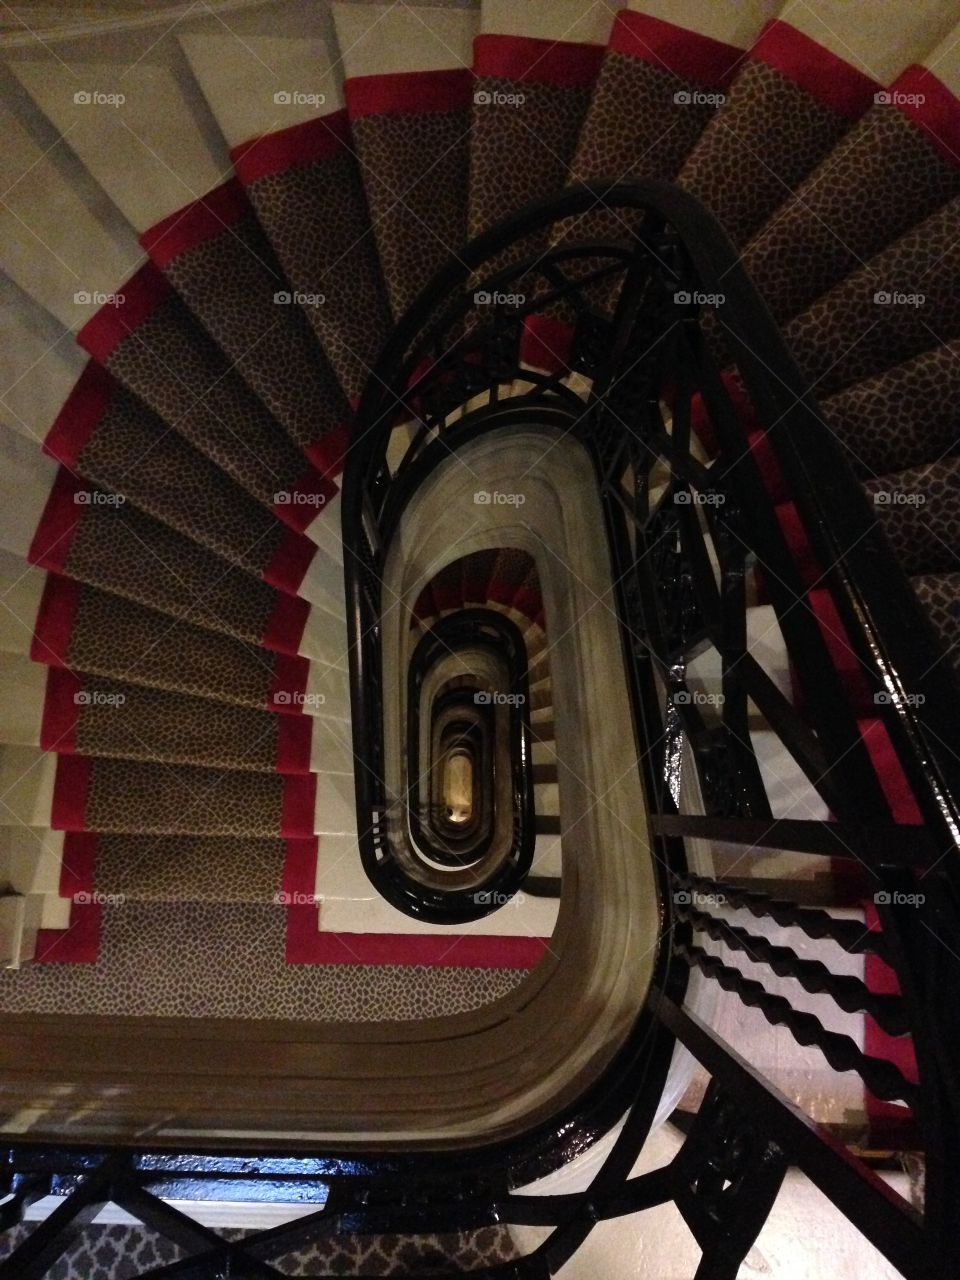 Spiral staircase. Staircase inside Paris hotel